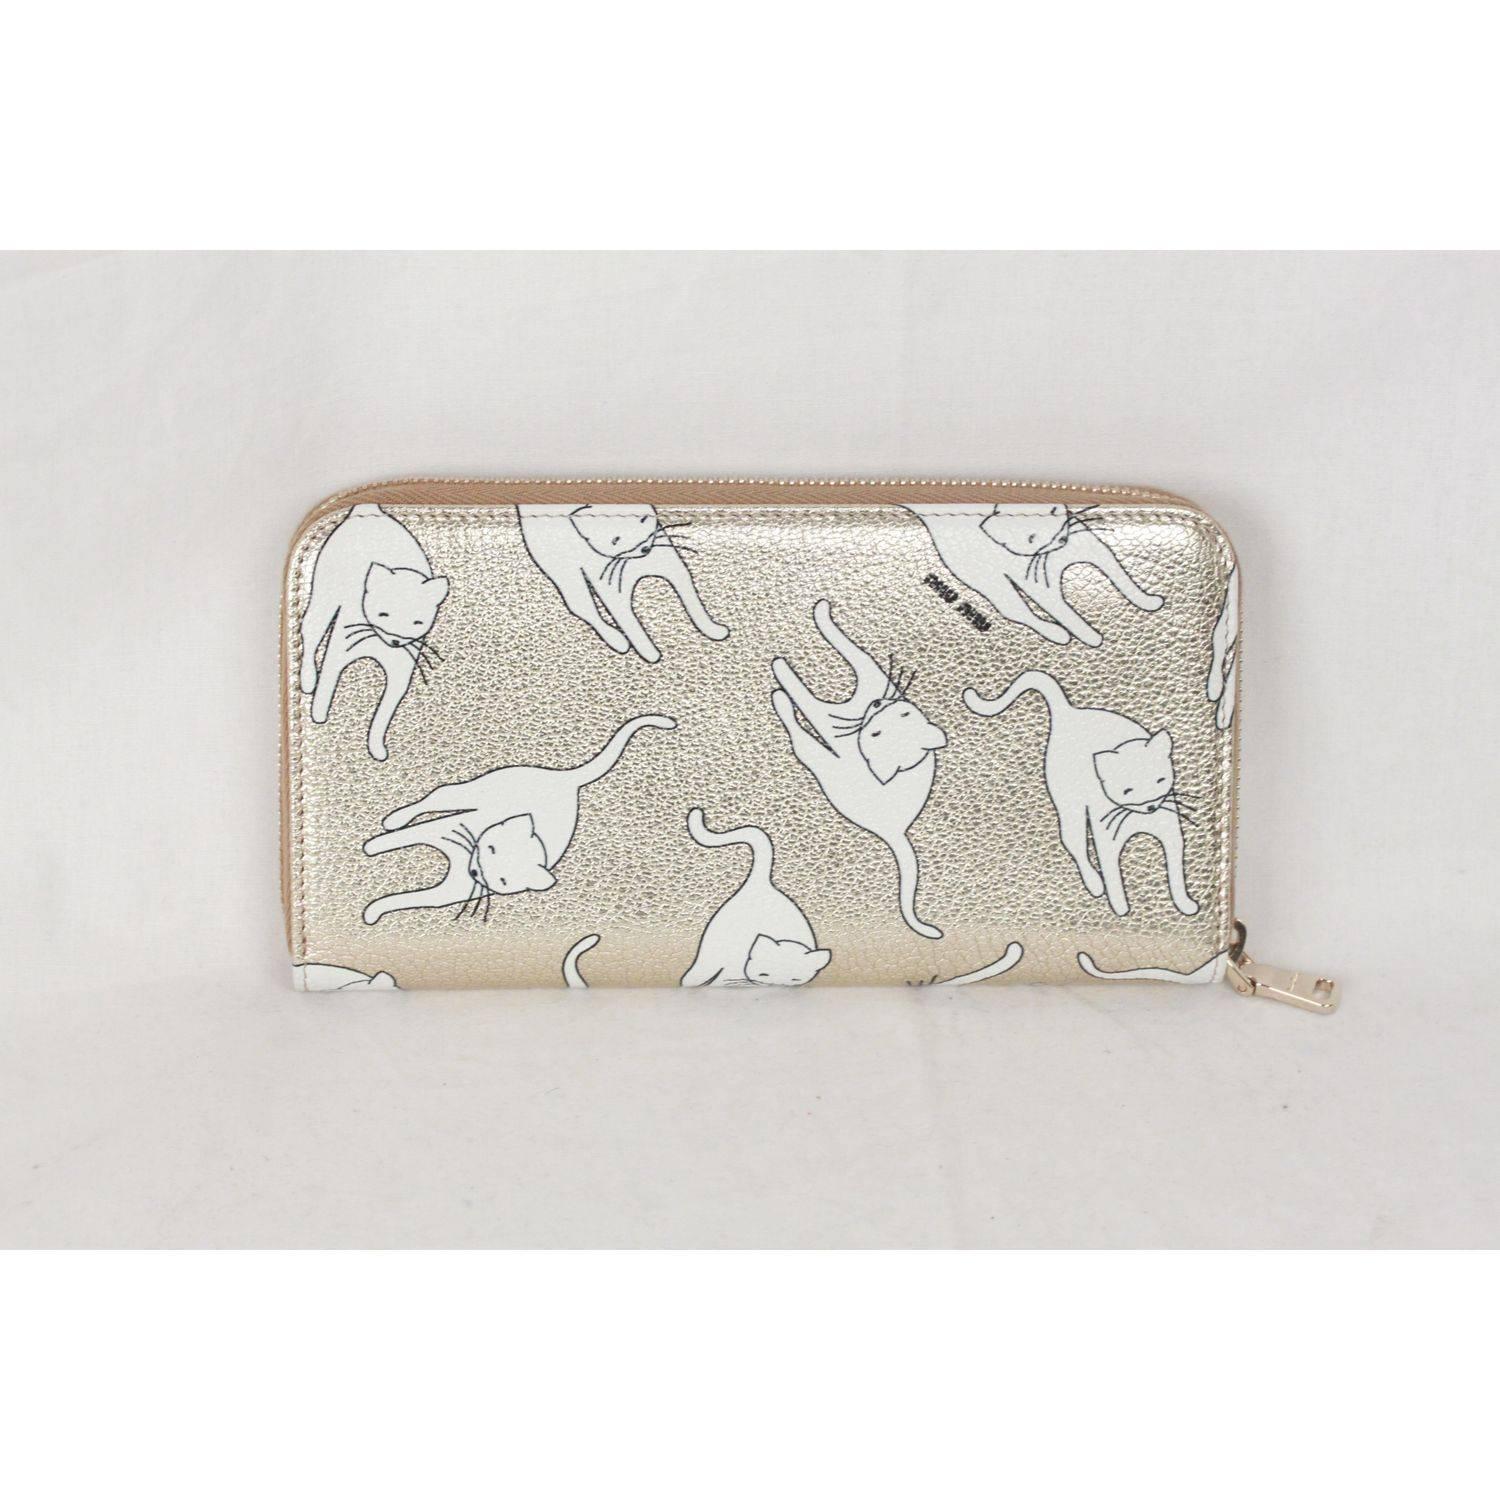 - Light Gold-tone leather wallet with white Cat Print (DUCHESSE) by MIU MIU
- classic continental shape
- Gold metal hardware
- Metal lettering logo on the front
- Zipper closure
- 12 credit card slots
- 3 main bill comartments
- 1 coin compartment